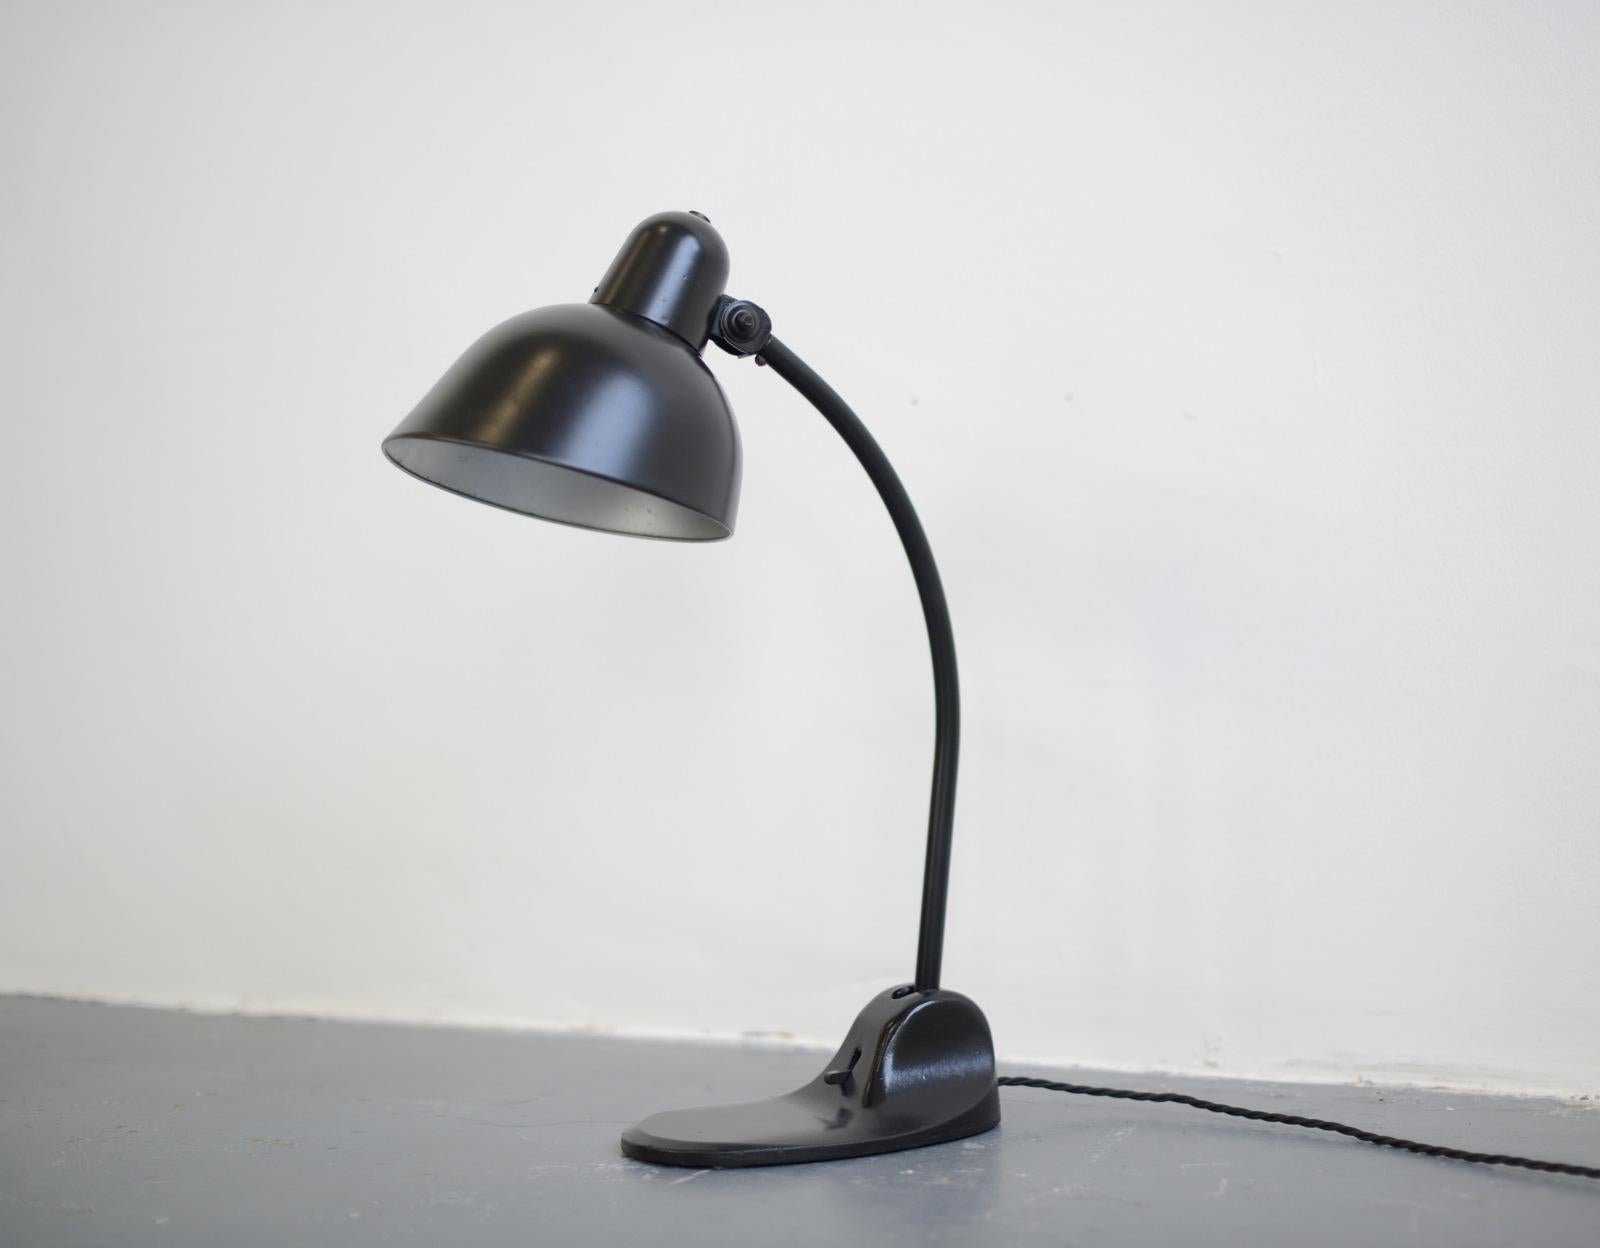 Bauhaus table Lamp by Siemens, circa 1930s

- Cast iron base with On/Off switch 
- Steel shade
- Curved steel adjustable arm
- German, 1930s
- Measures: 49cm tall x 20cm deep x 12cm wide

Siemens

Siemens & Halske was founded by Werner von